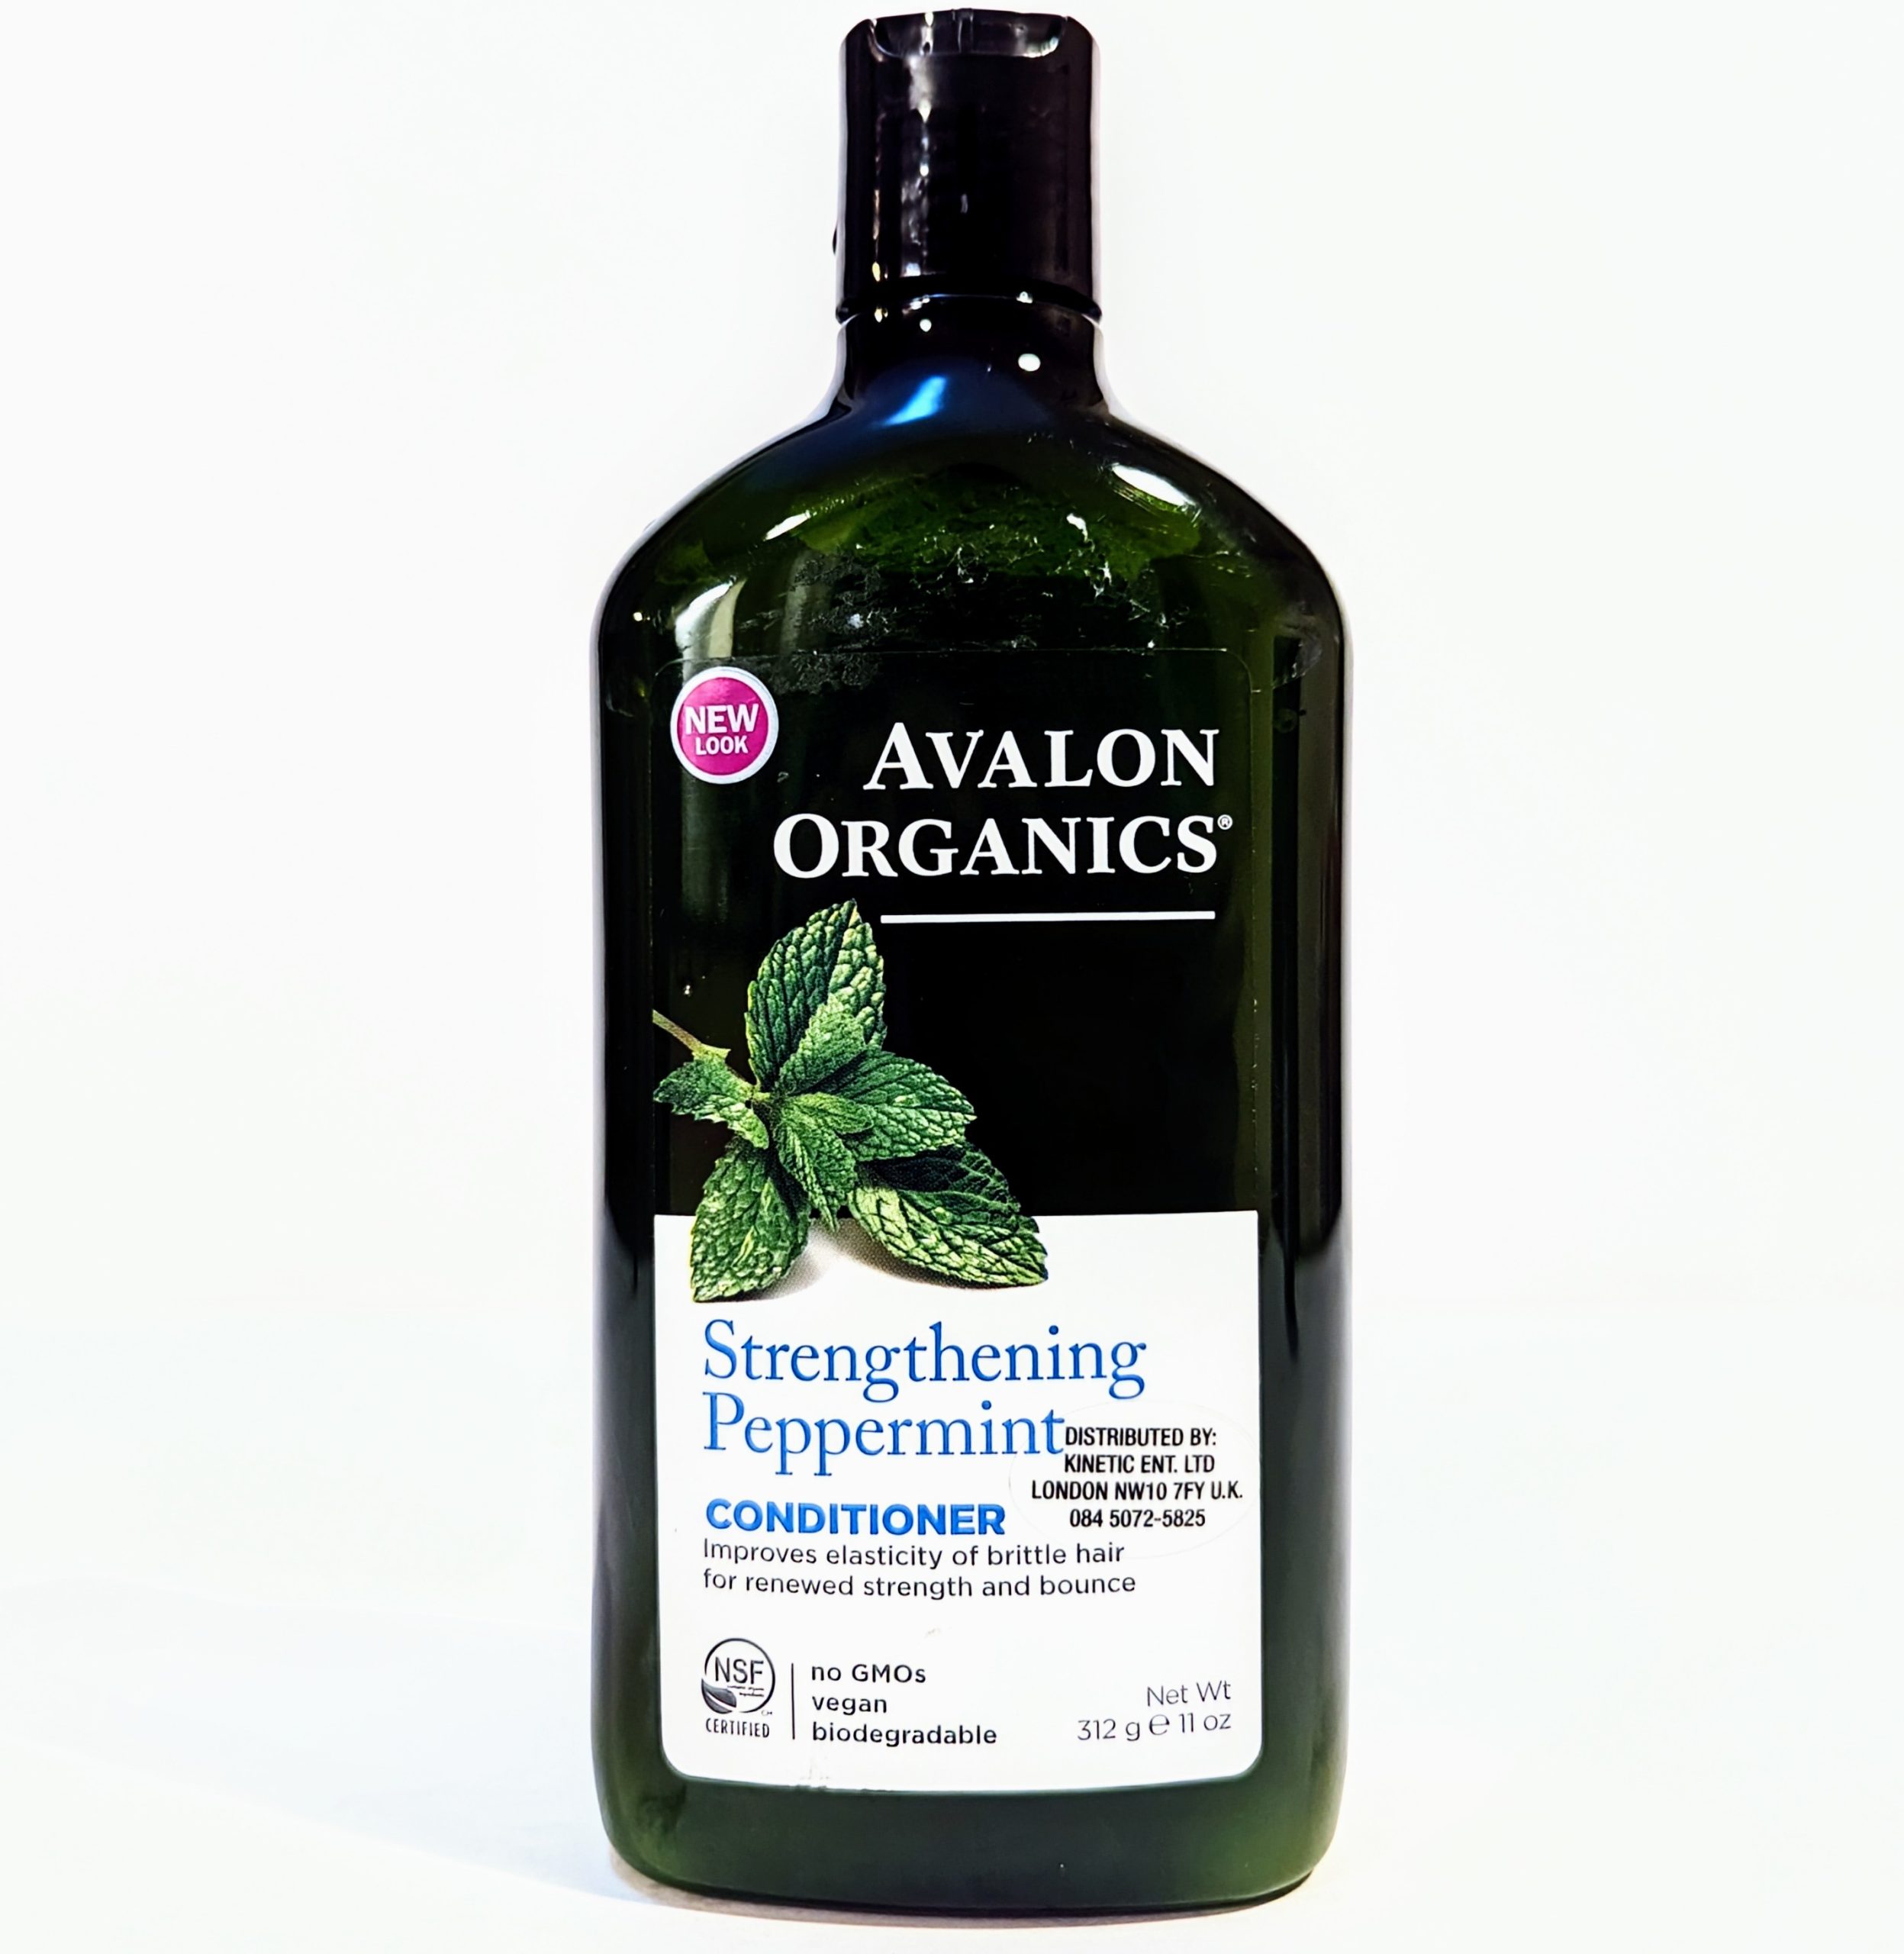 A bottle of Avalon Organics Strengthening Peppermint Conditioner with a new look label, claiming to improve elasticity of brittle hair. The bottle is green and contains 11 oz (312 g).